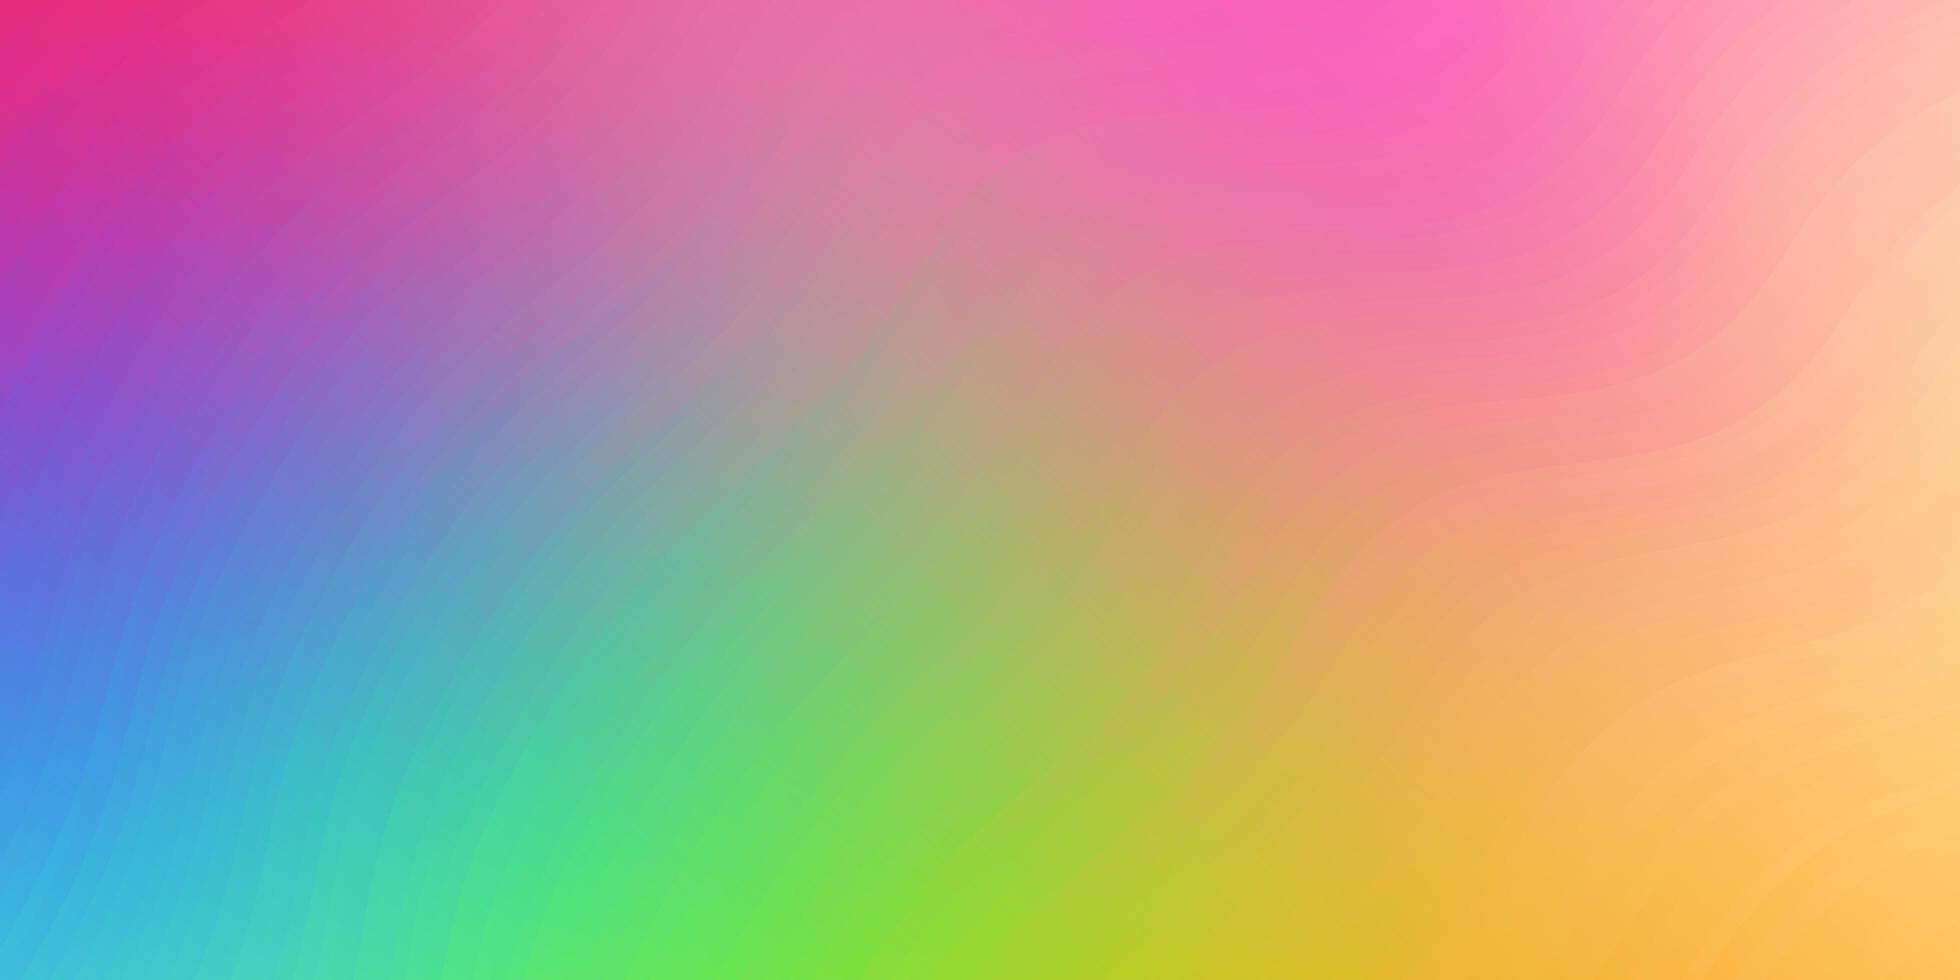 Light Multicolor vector background with lines. Bright sample with colorful bent lines, shapes. Template for your UI design.